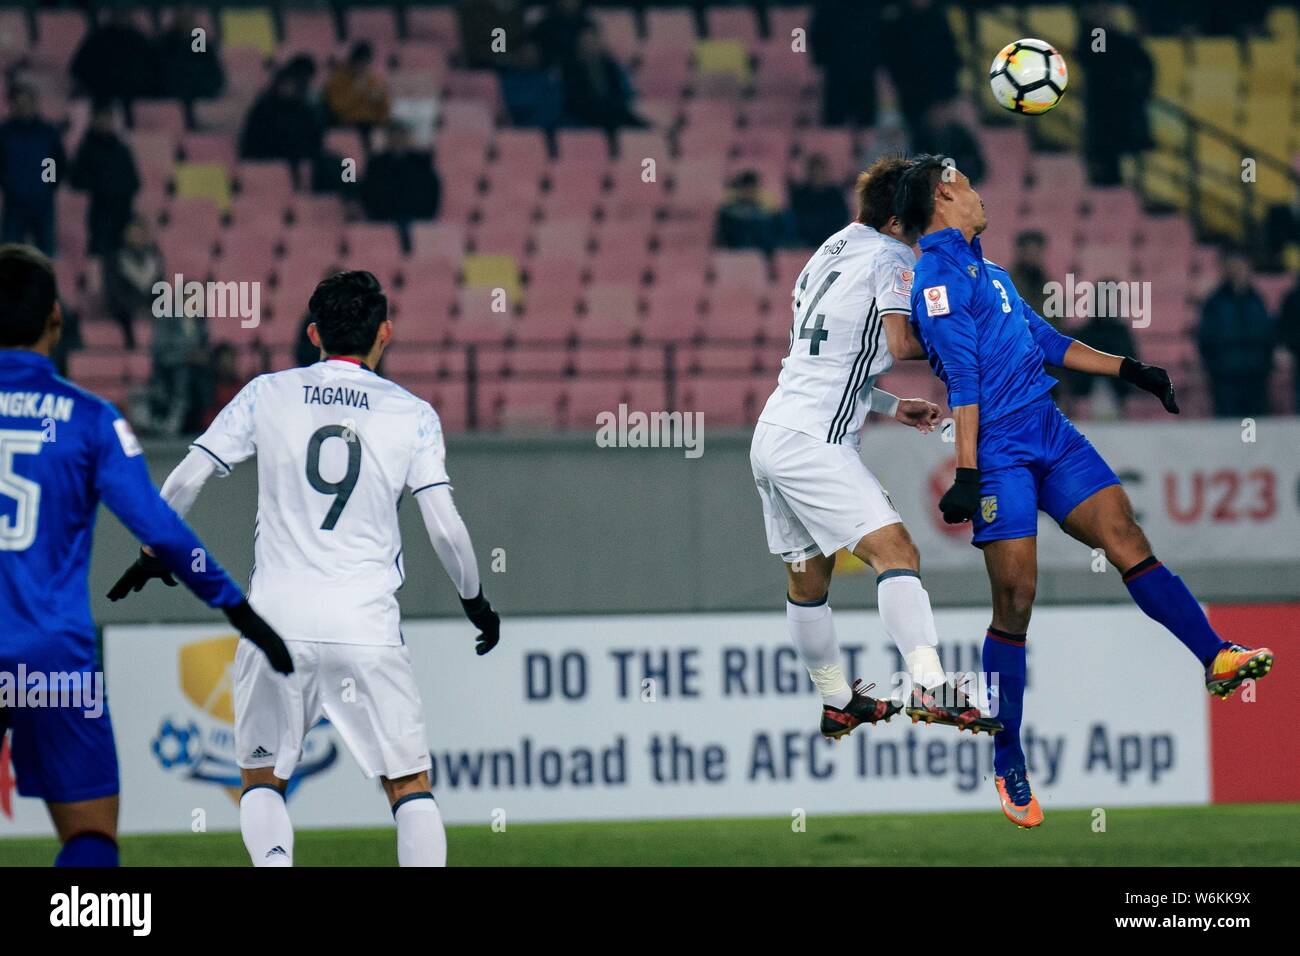 Itakura Kou, left, of Japan heads the ball to make a pass against a player of Thailand in their Group B match during the 2018 AFC U-23 Championship in Stock Photo